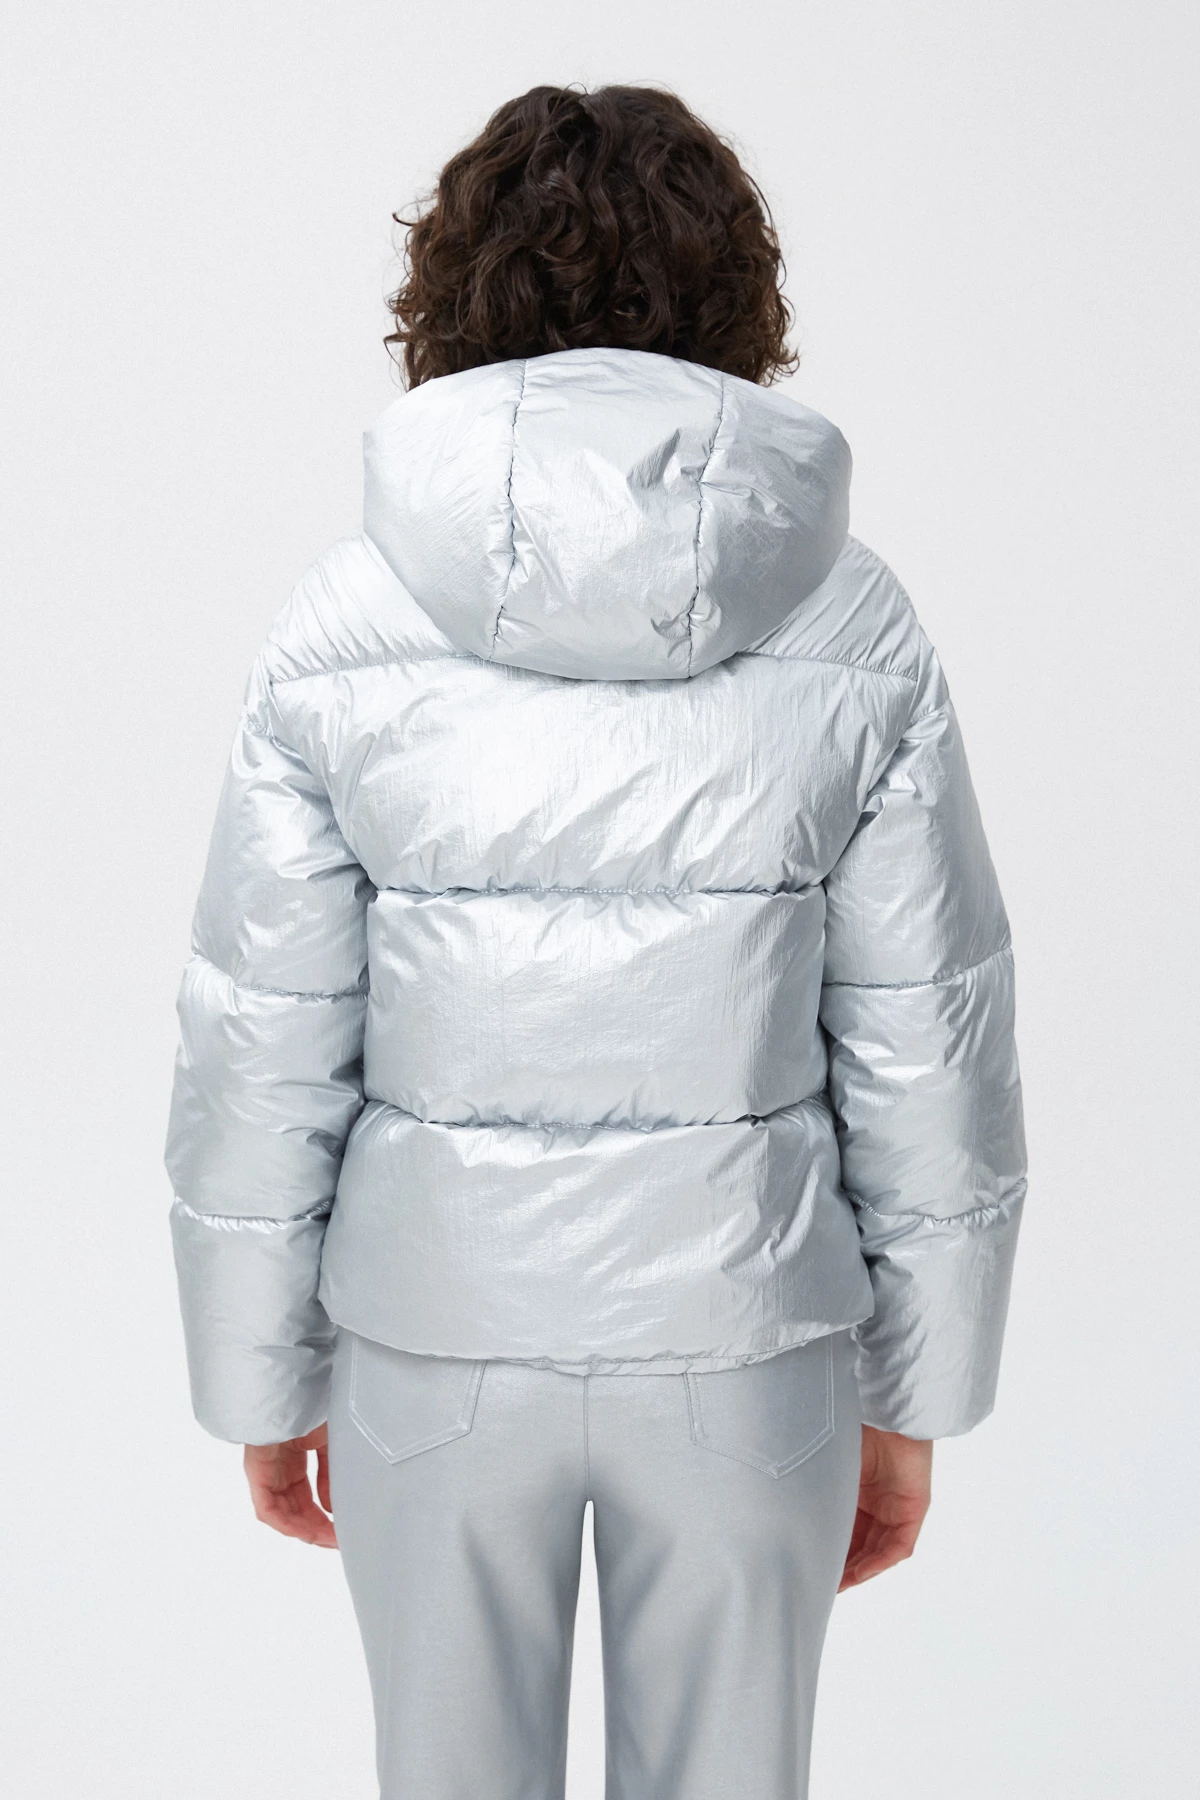 Metalic cropped puffer jacket with insulation, photo 6